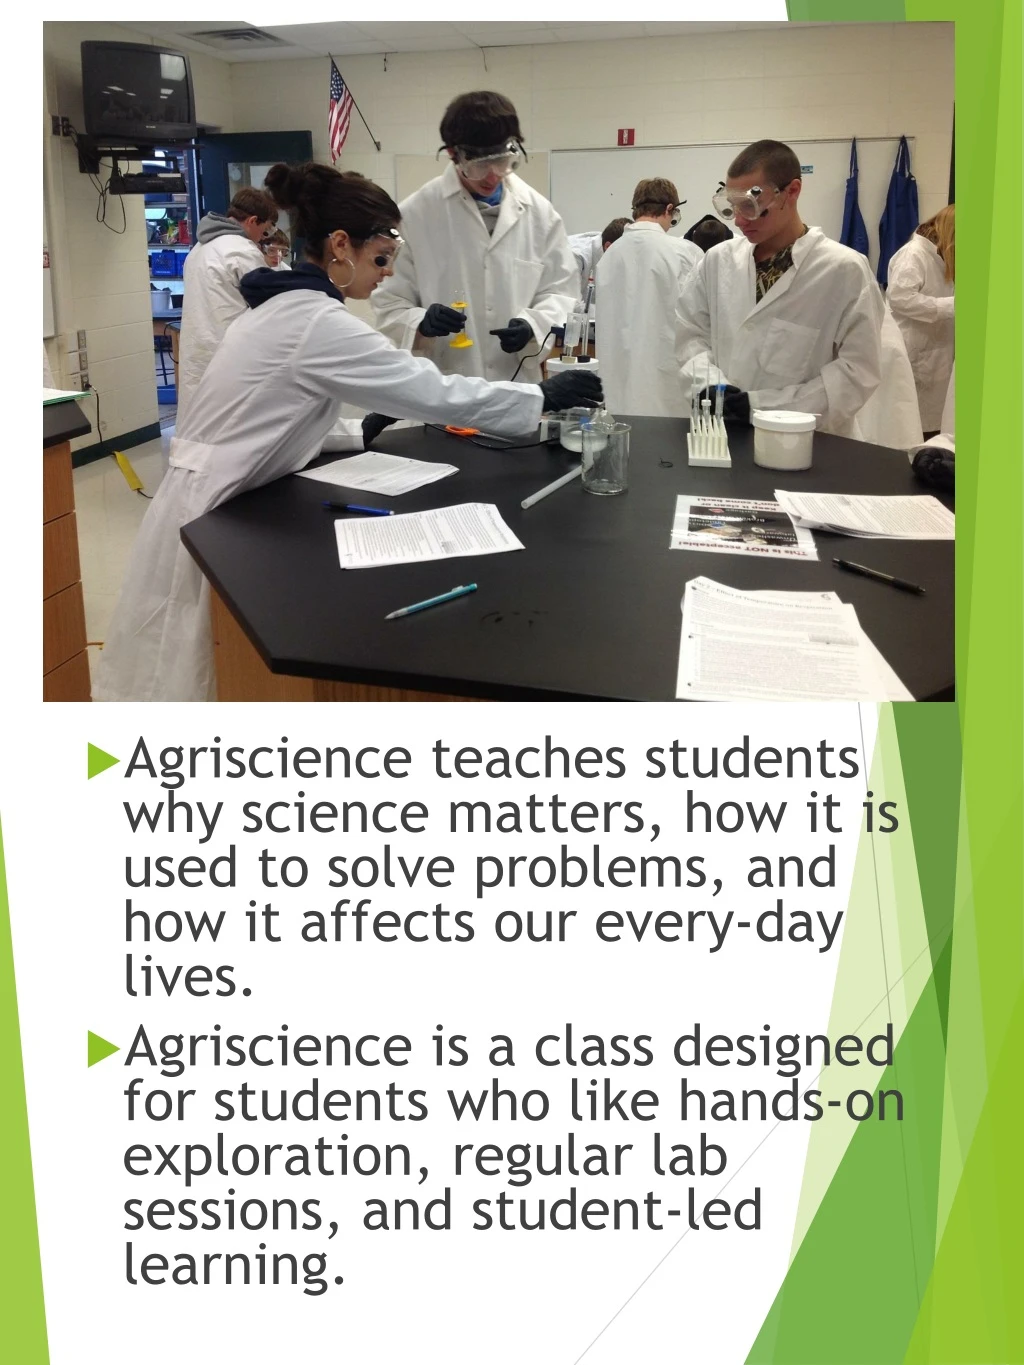 agriscience teaches students why science matters